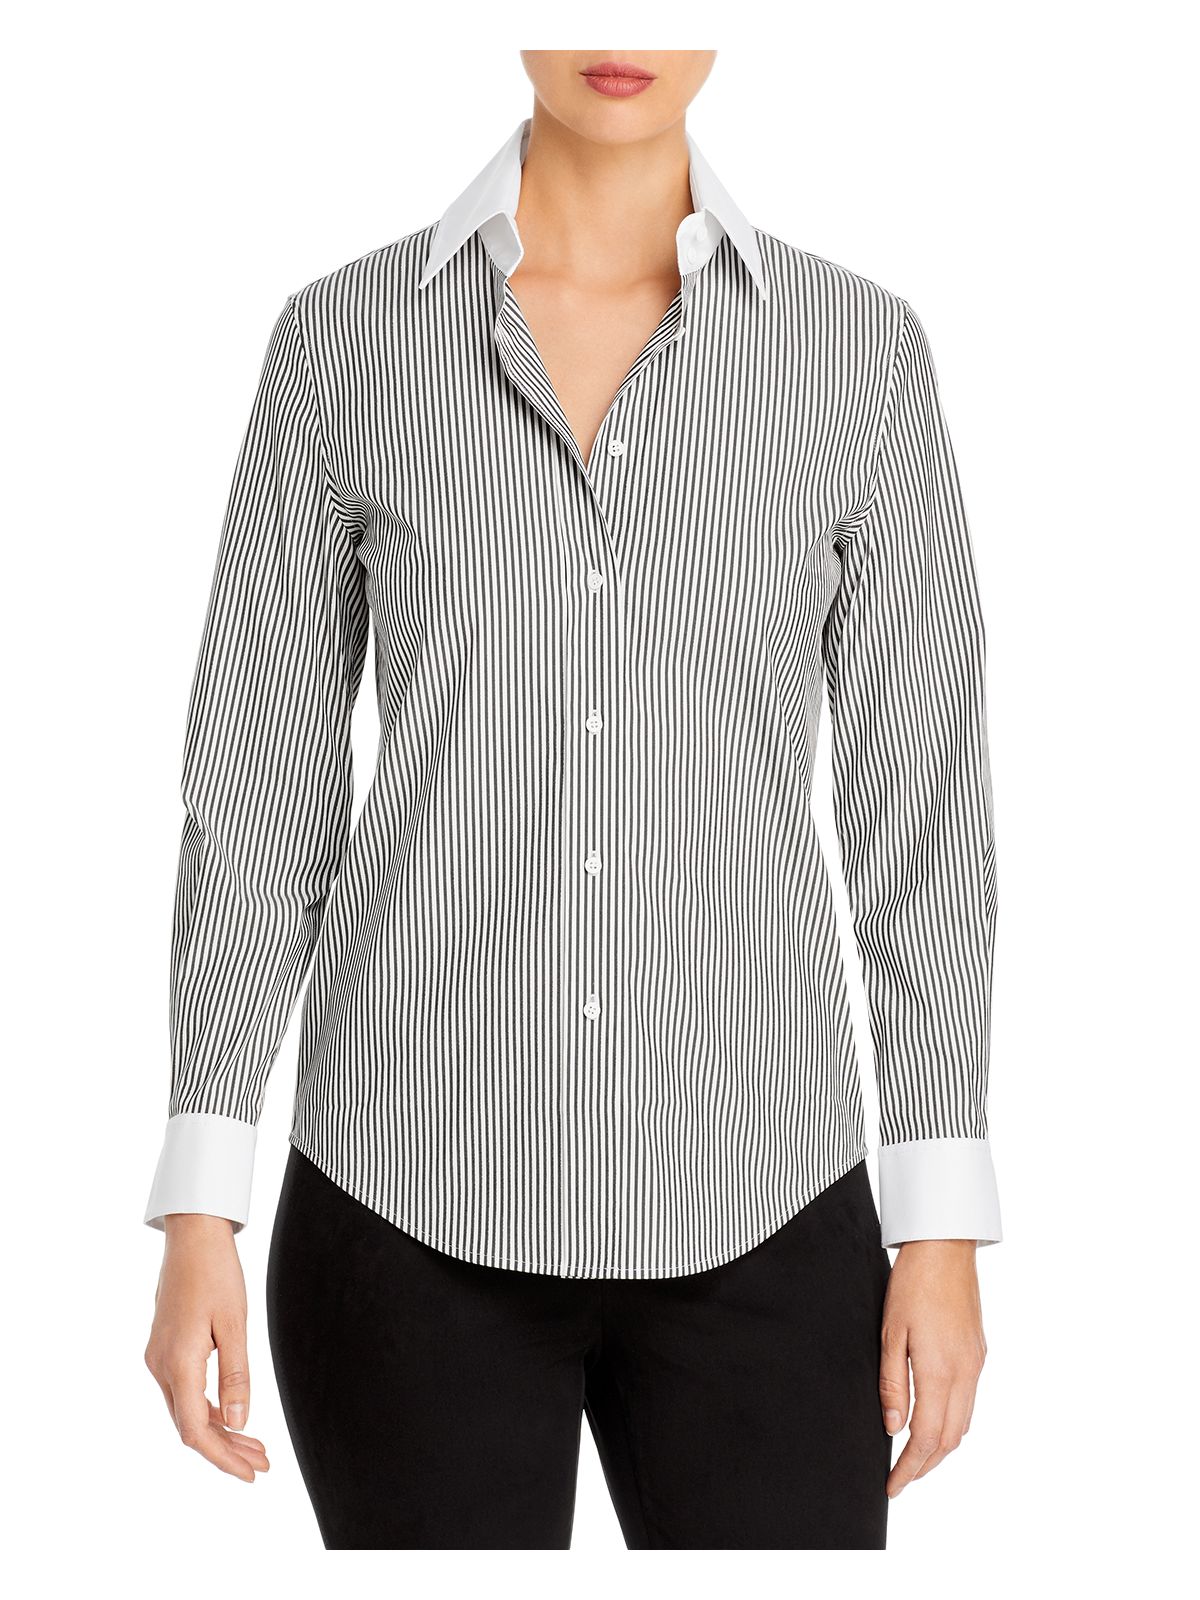 LAFAYETTE 148 Womens White Striped Cuffed Sleeve Collared Wear To Work Button Up Top S